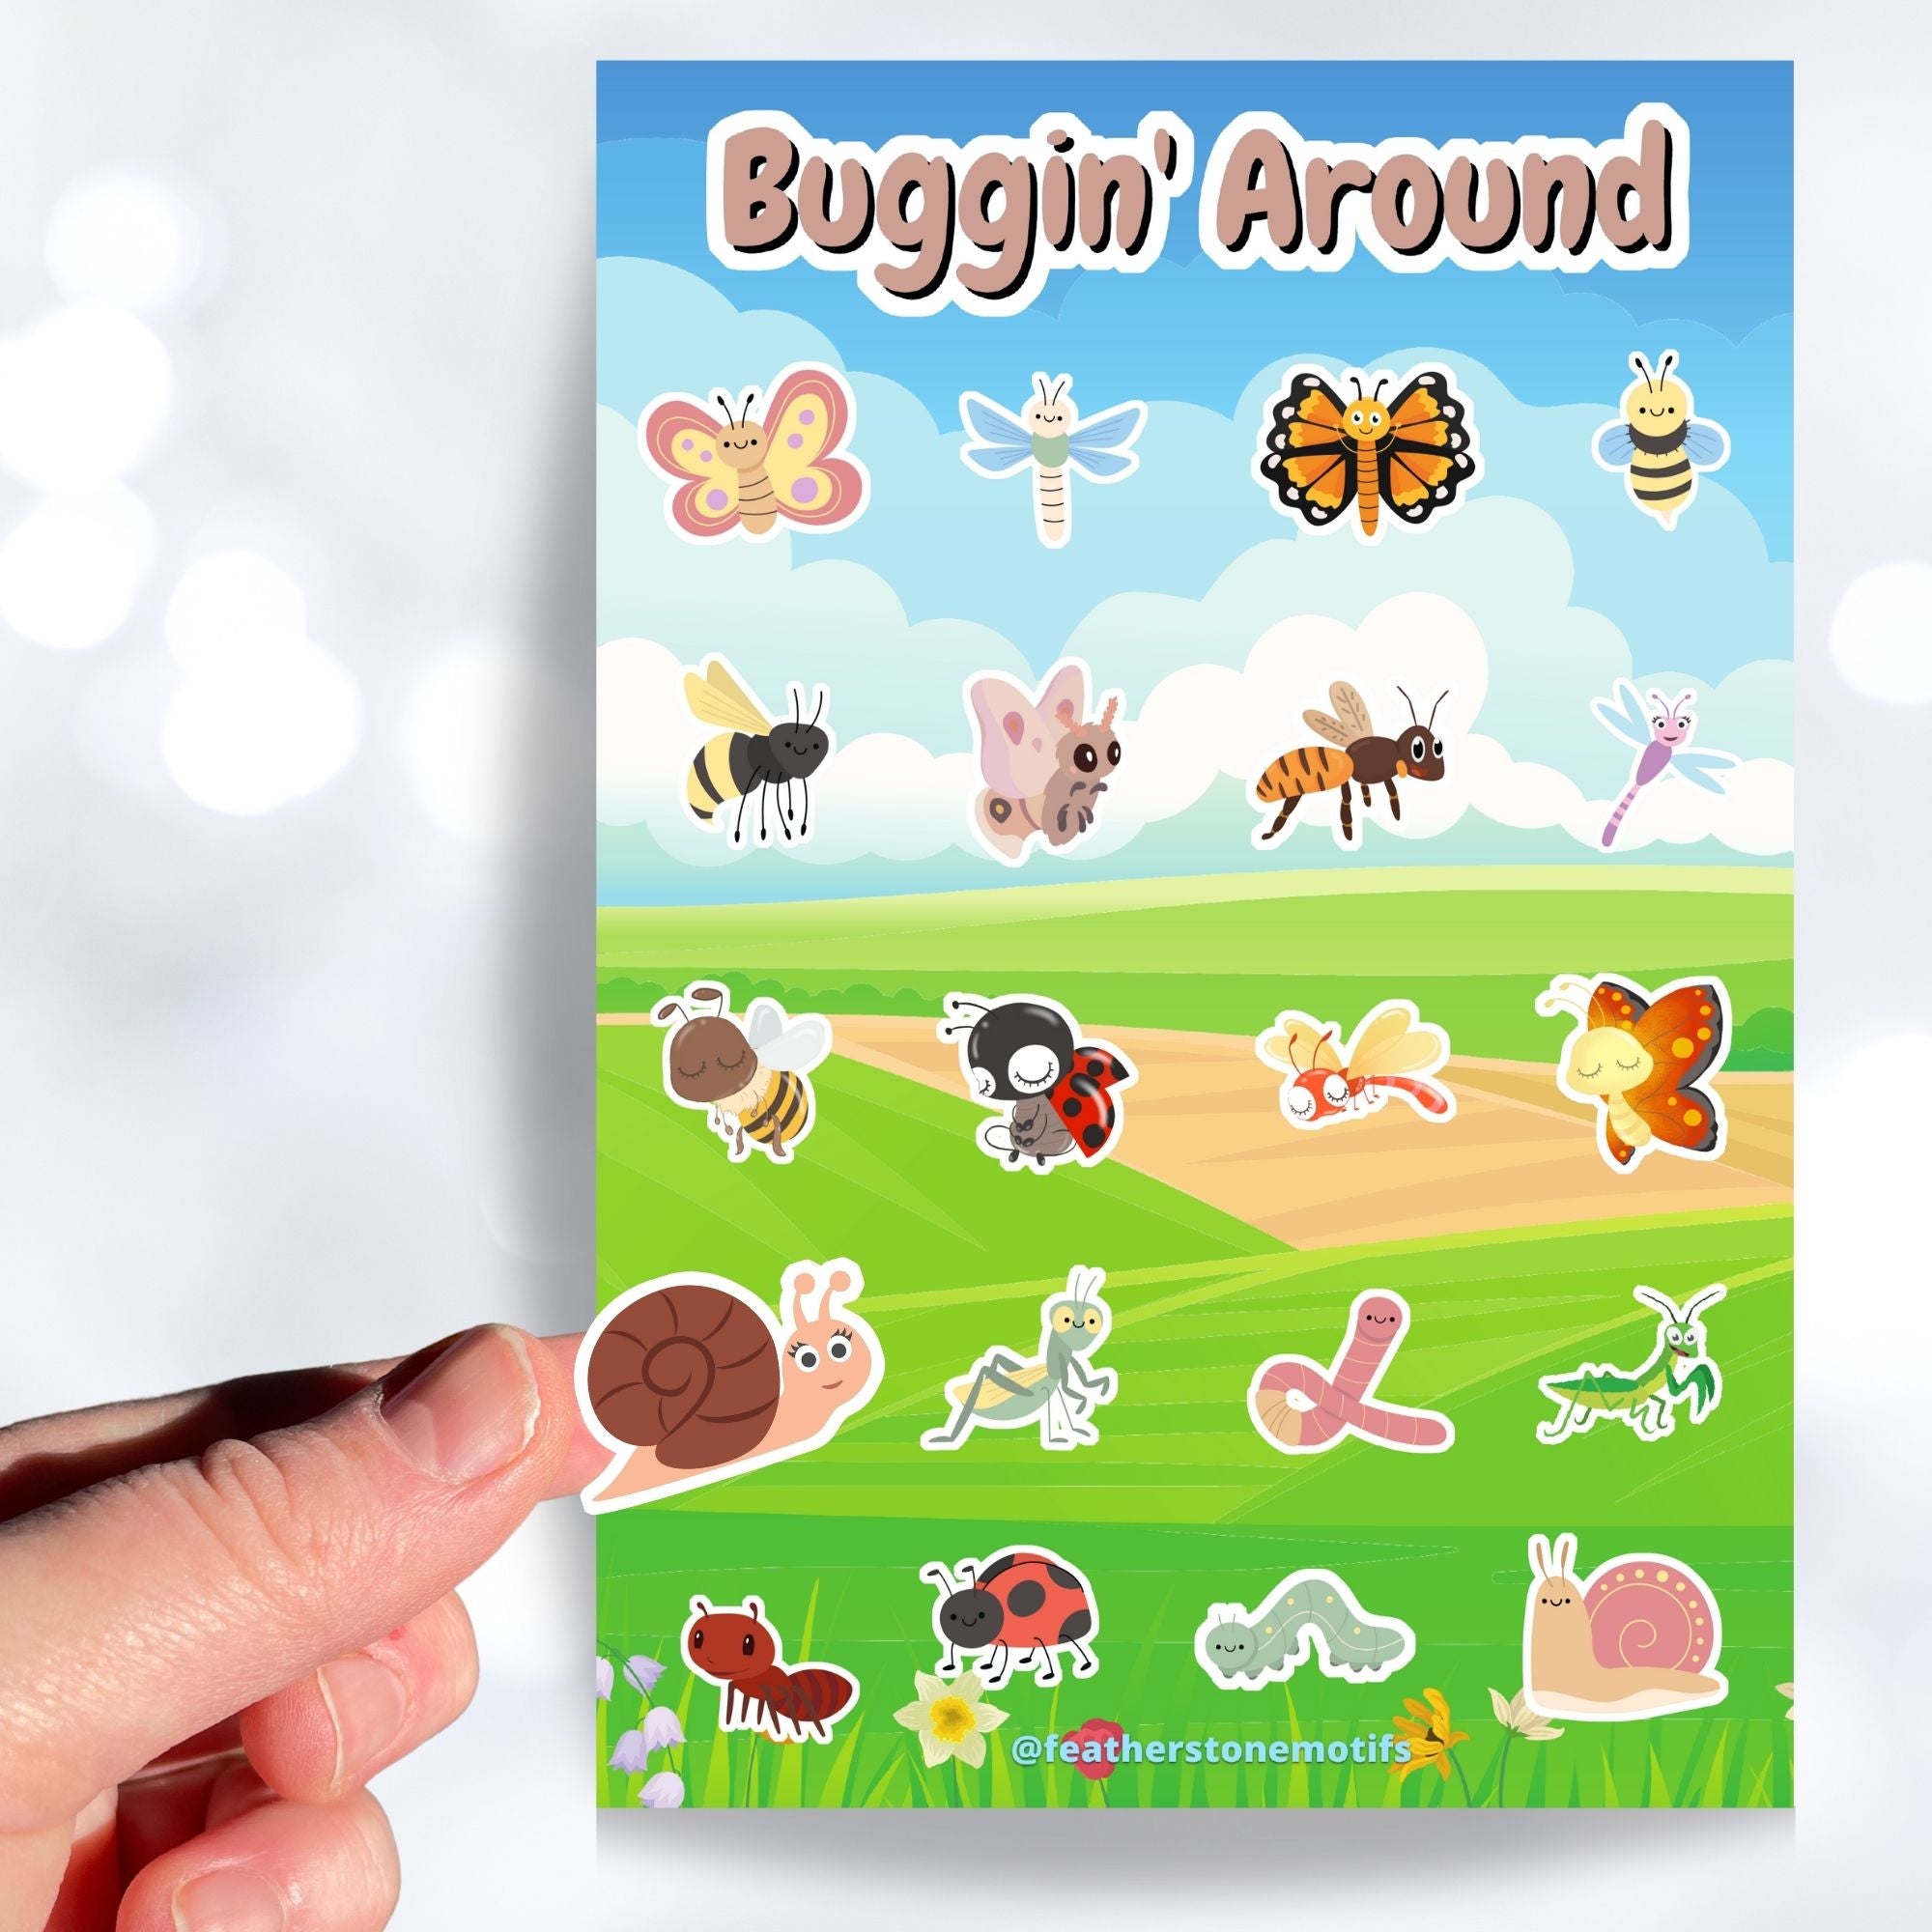 Butterflies, bees, worms, snails, and dragonfly's; this sticker sheet has cute stickers of all of your favorite bugs. This image shows a hand holding a snail sticker above the sticker sheet.